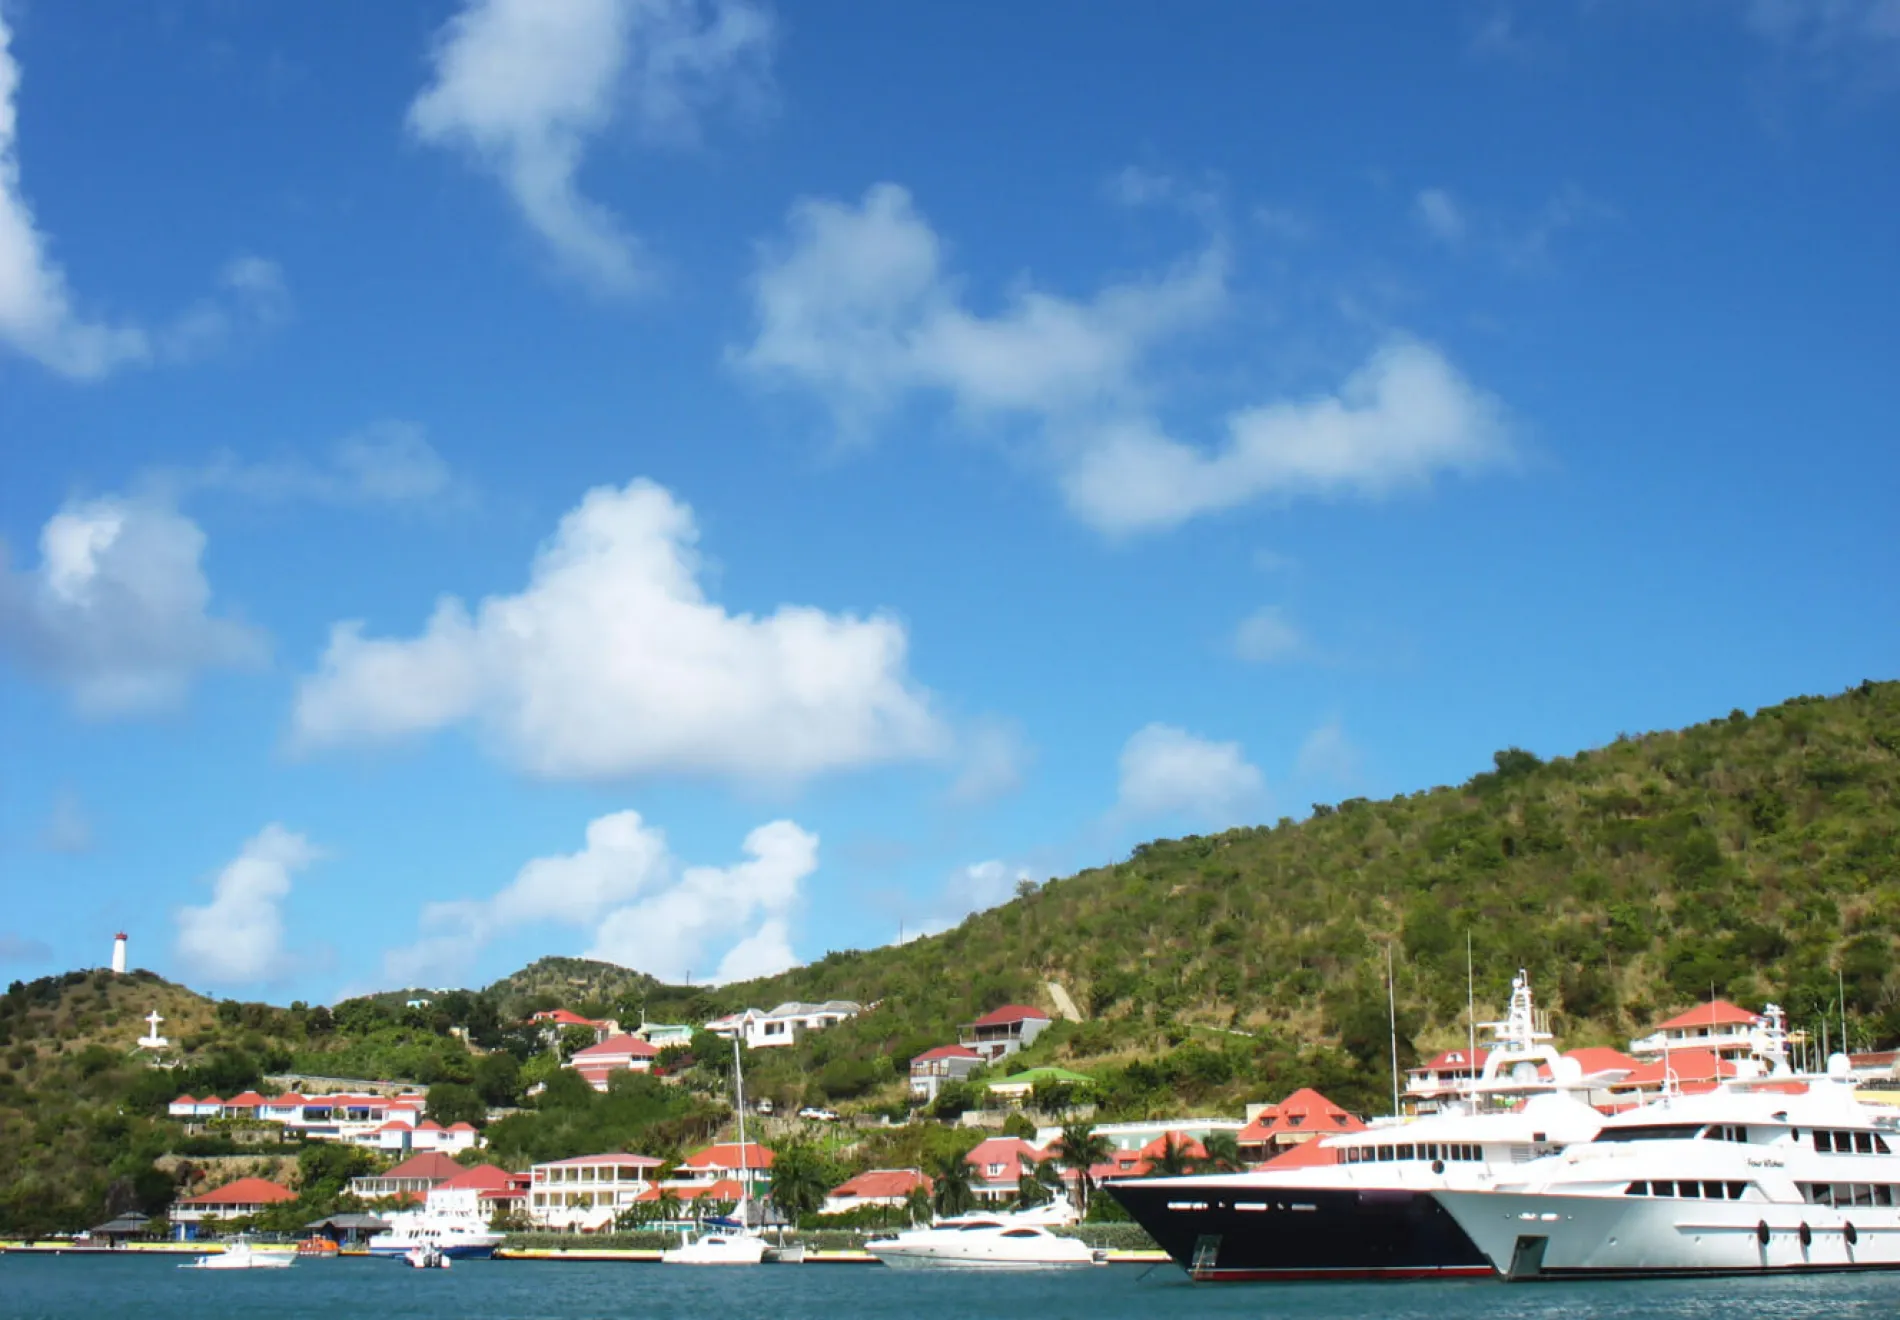 Mega yachts in Gustavia Harbor at St. Barts, French West Indies